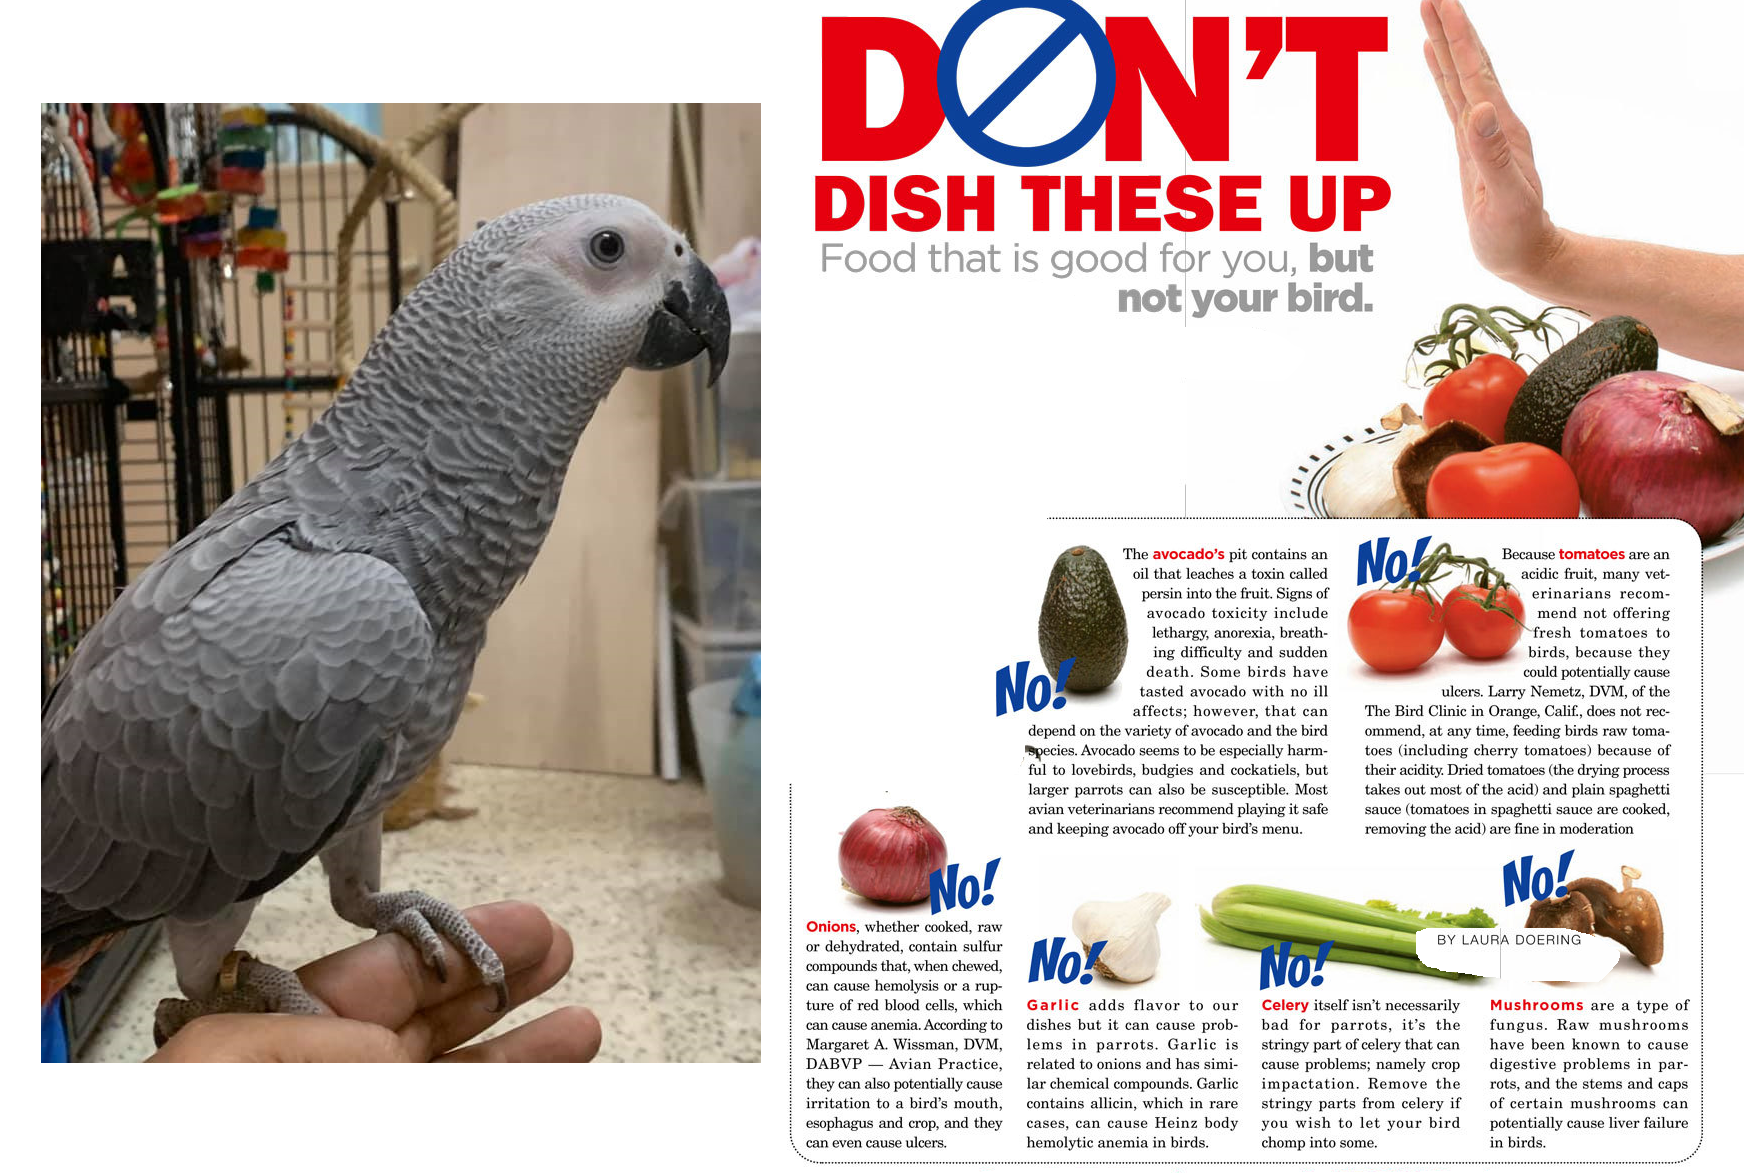 Toxic foods for parrots